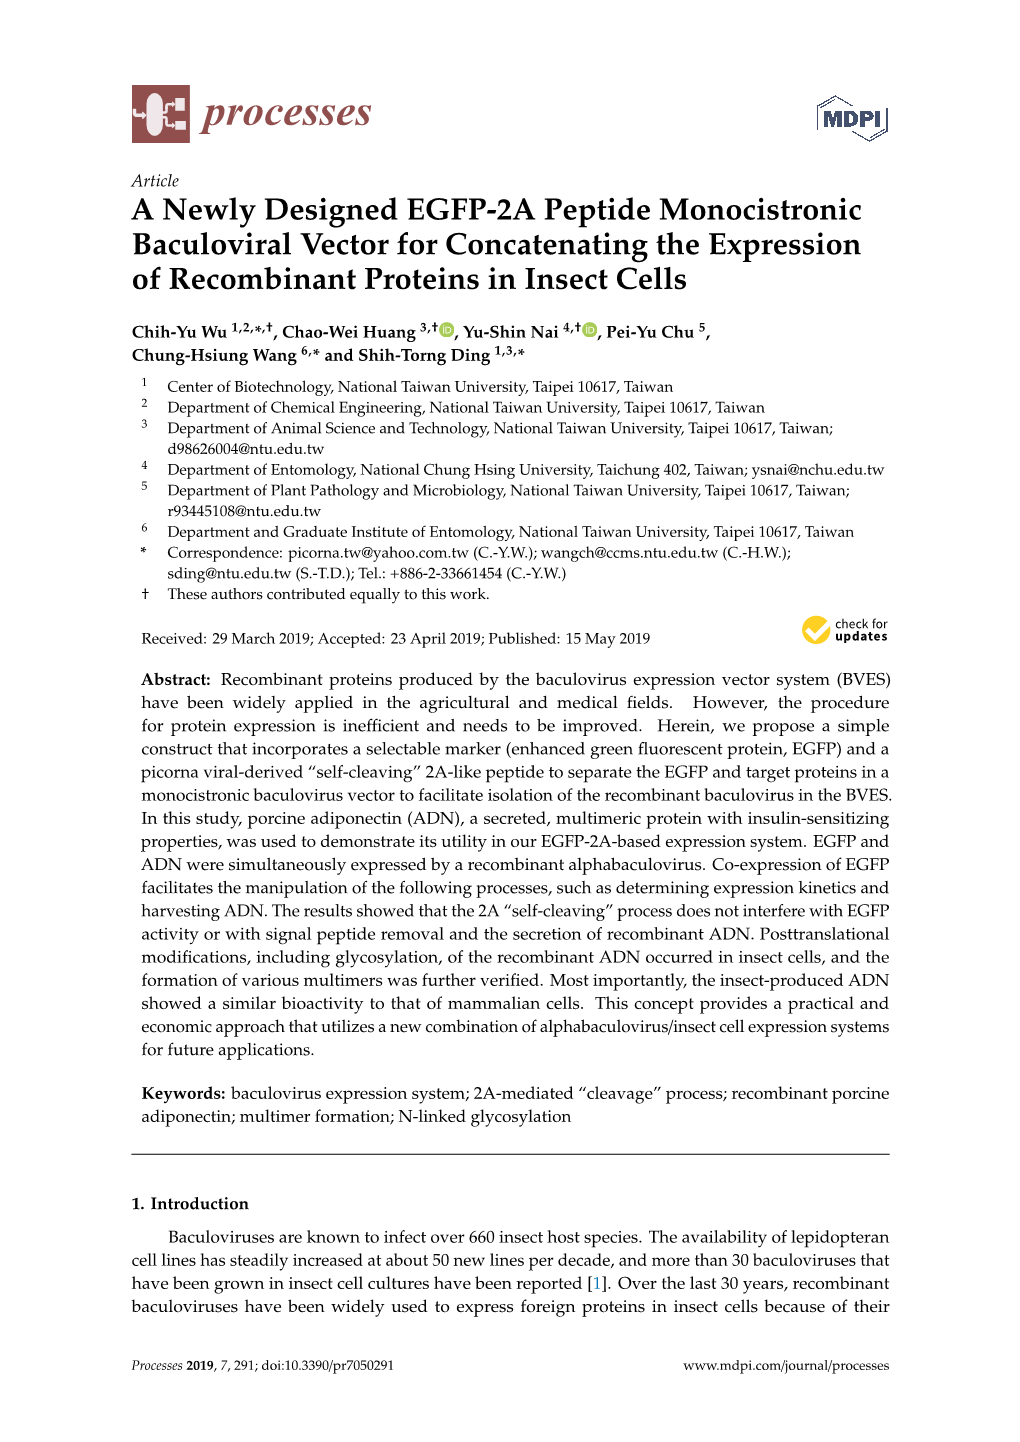 A Newly Designed EGFP-2A Peptide Monocistronic Baculoviral Vector for Concatenating the Expression of Recombinant Proteins in Insect Cells